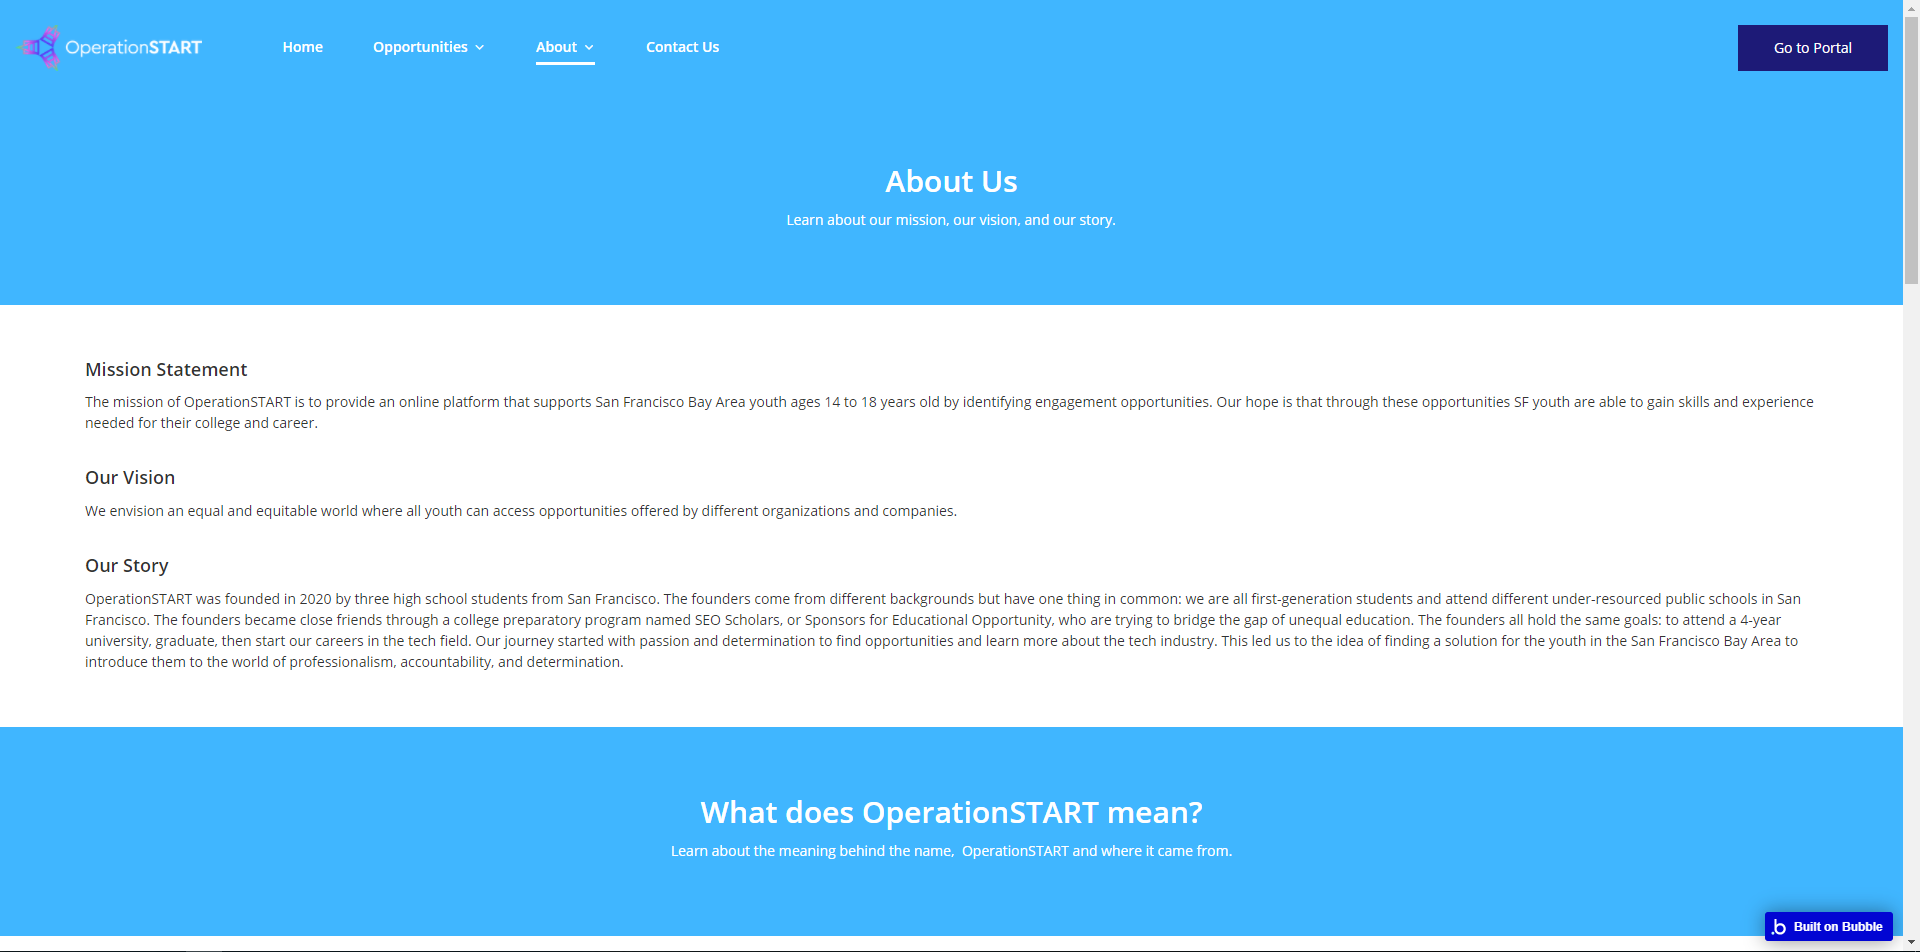 The about page of the OperationSTART website